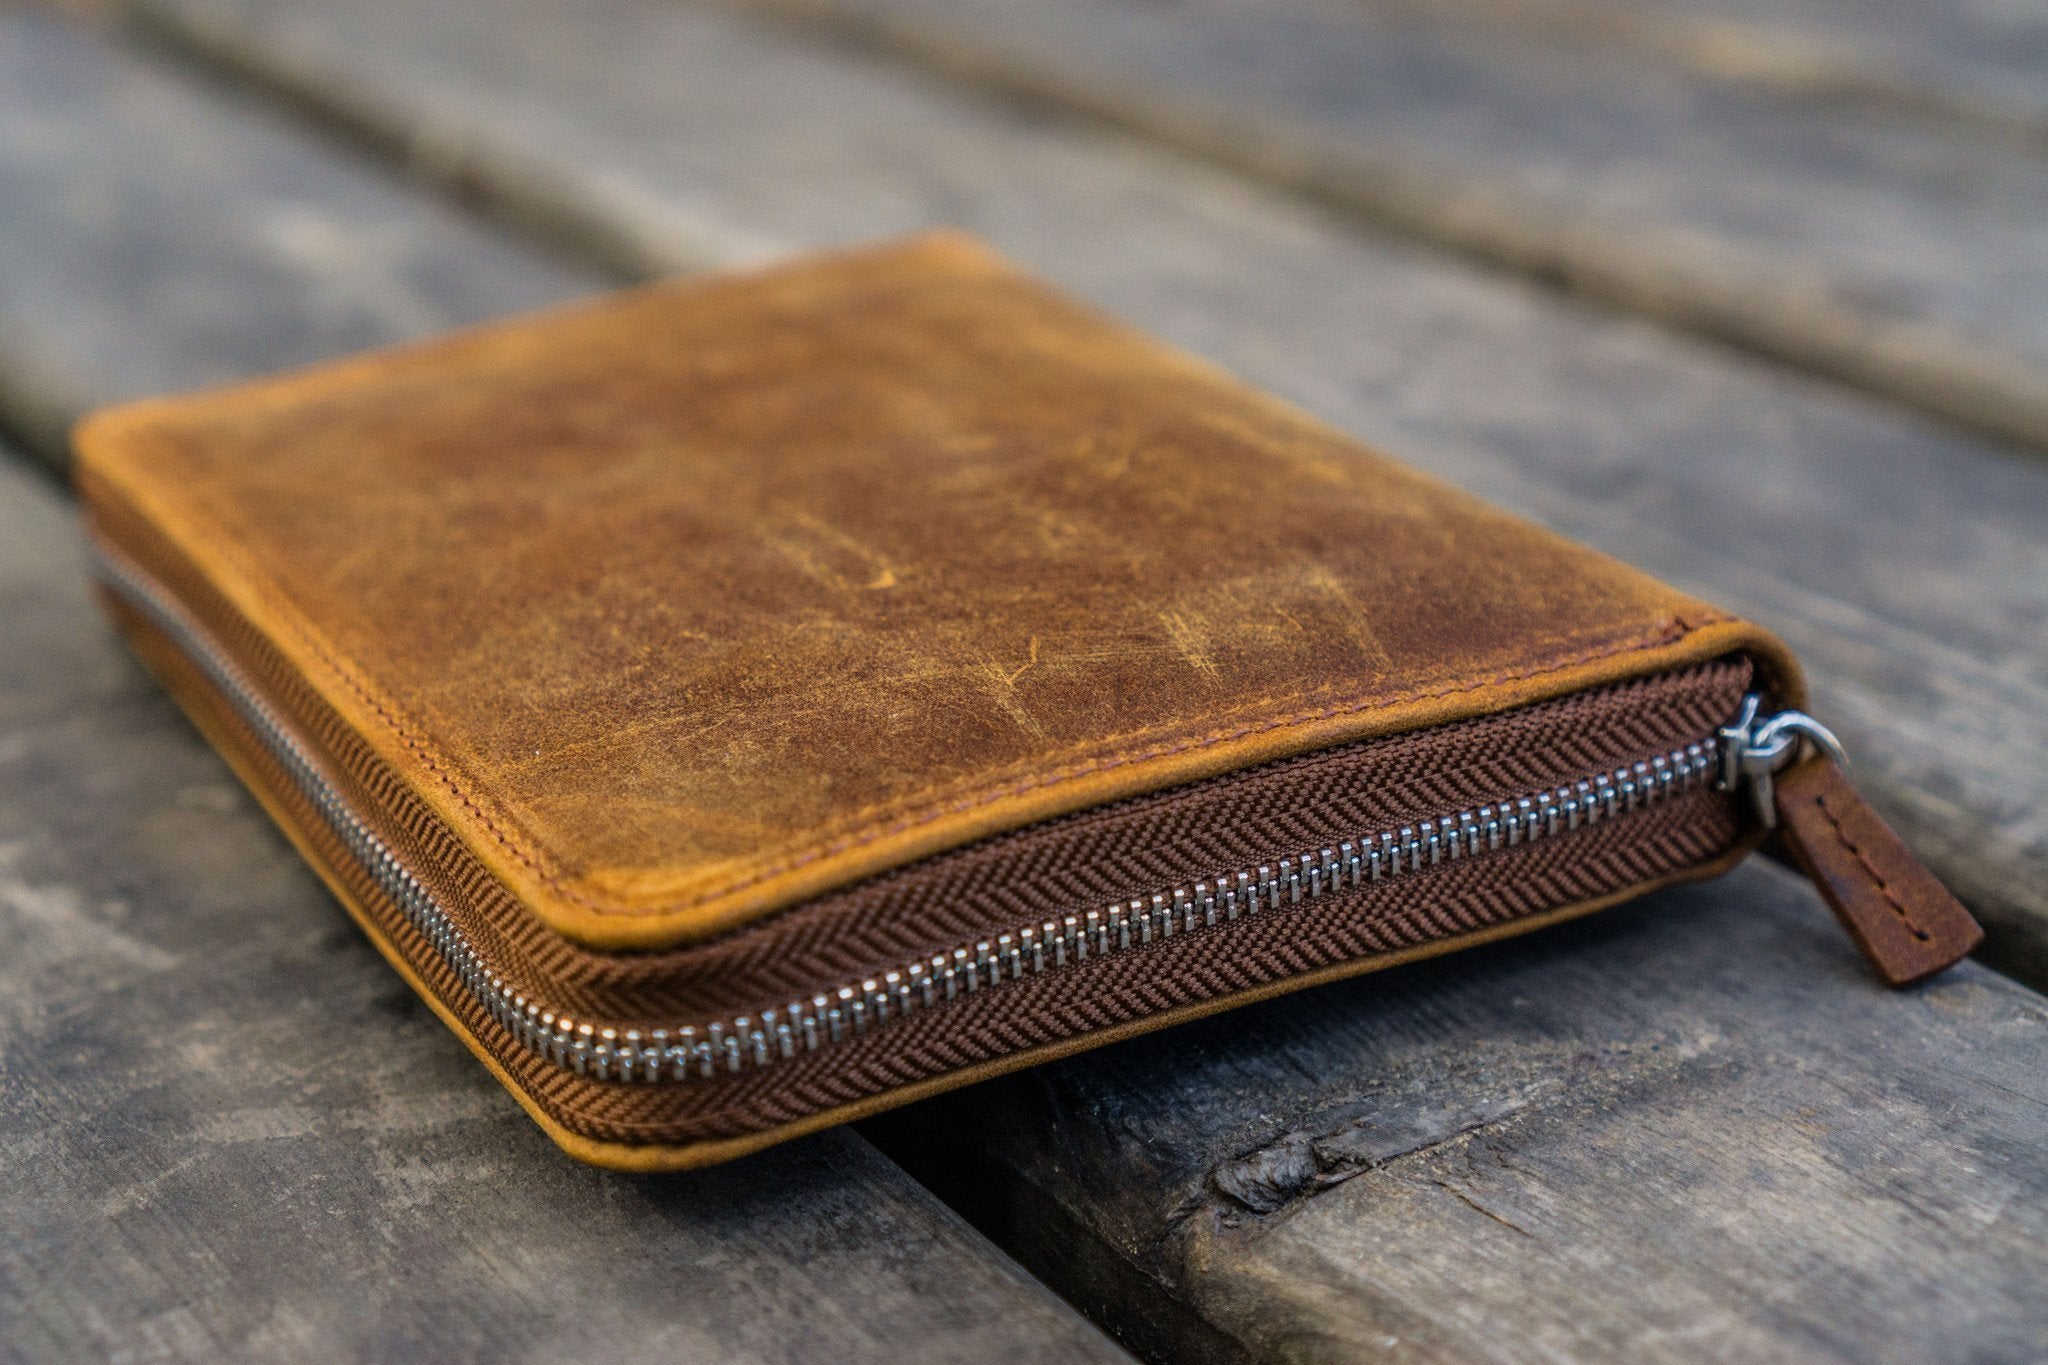 Leather Pencil Pouch #205 - Distressed Brown